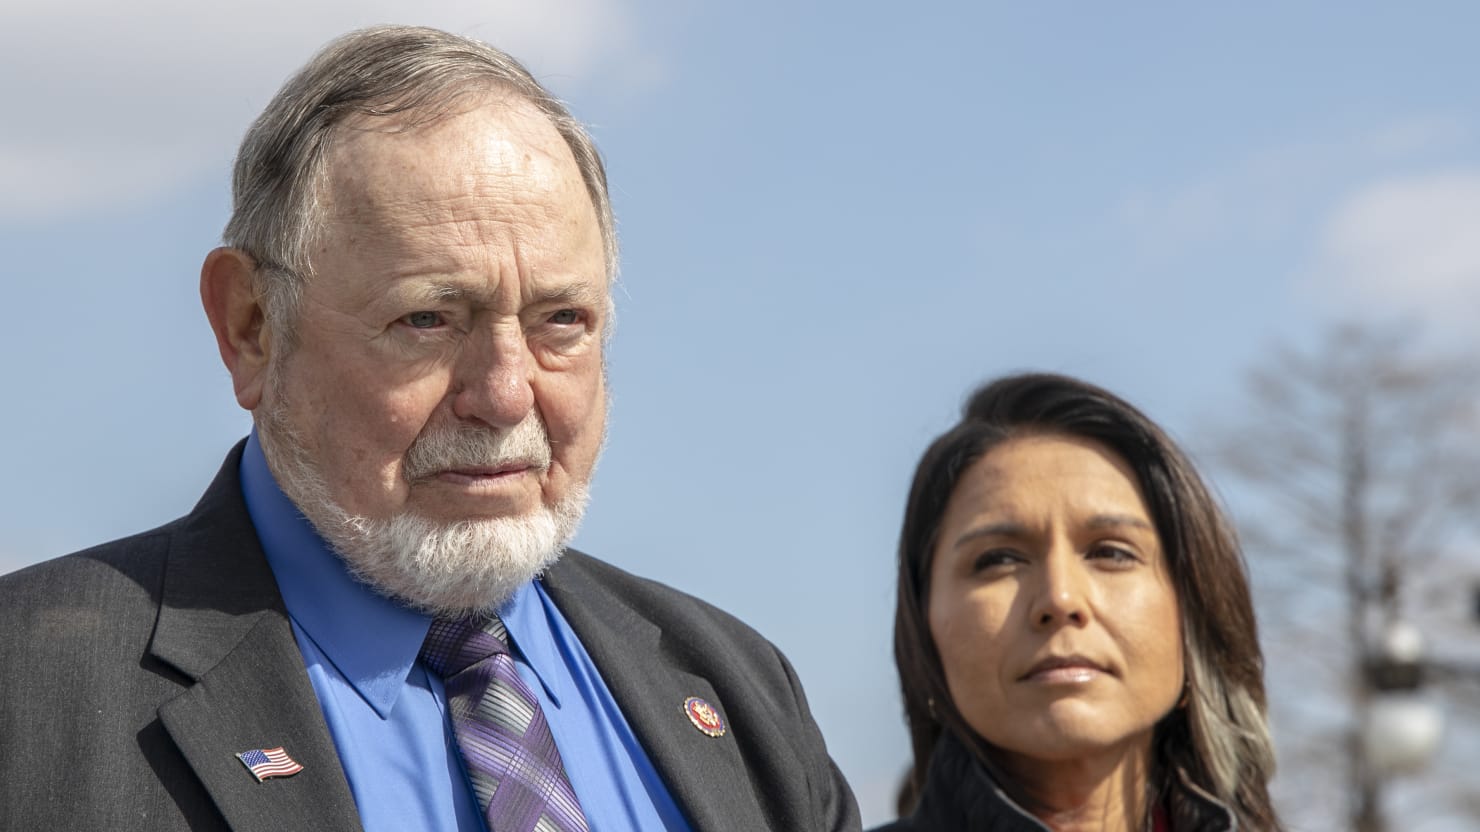 Don Young recently won his latest bid for re-election for Alaska’s only Hou...